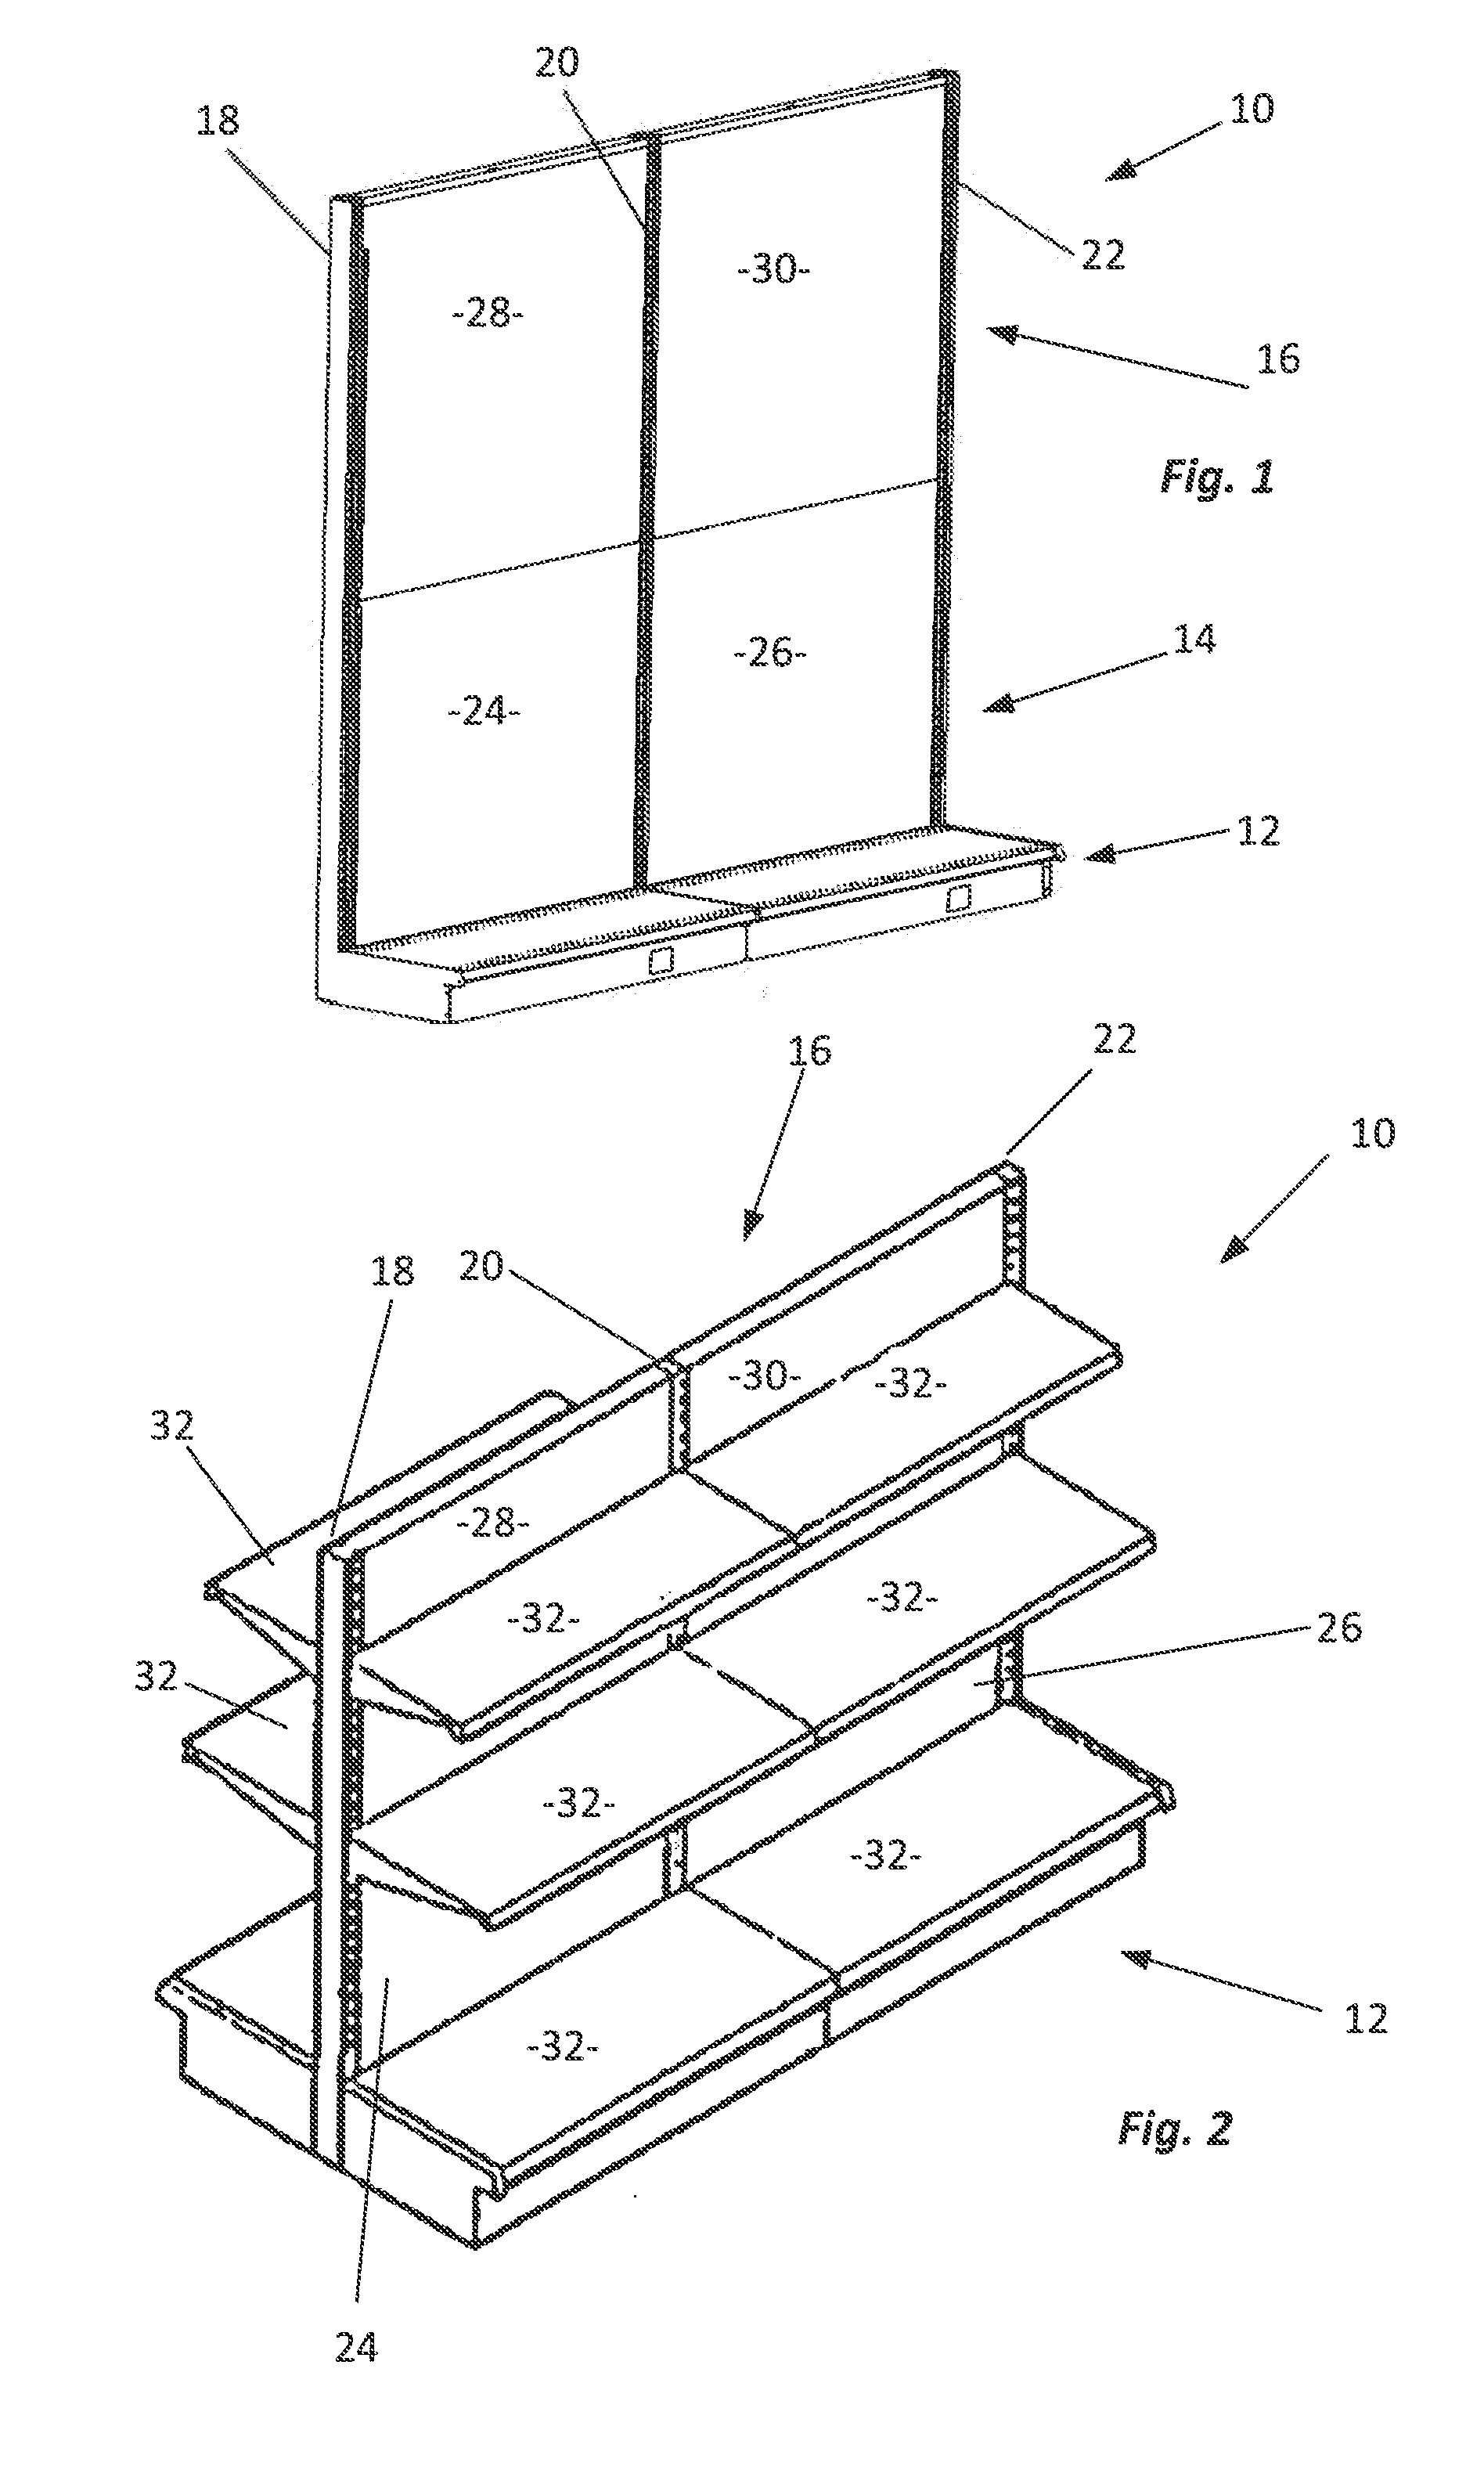 Electrical Assembly for Connecting Components of a Lighting System for Illuminating Store Shelving